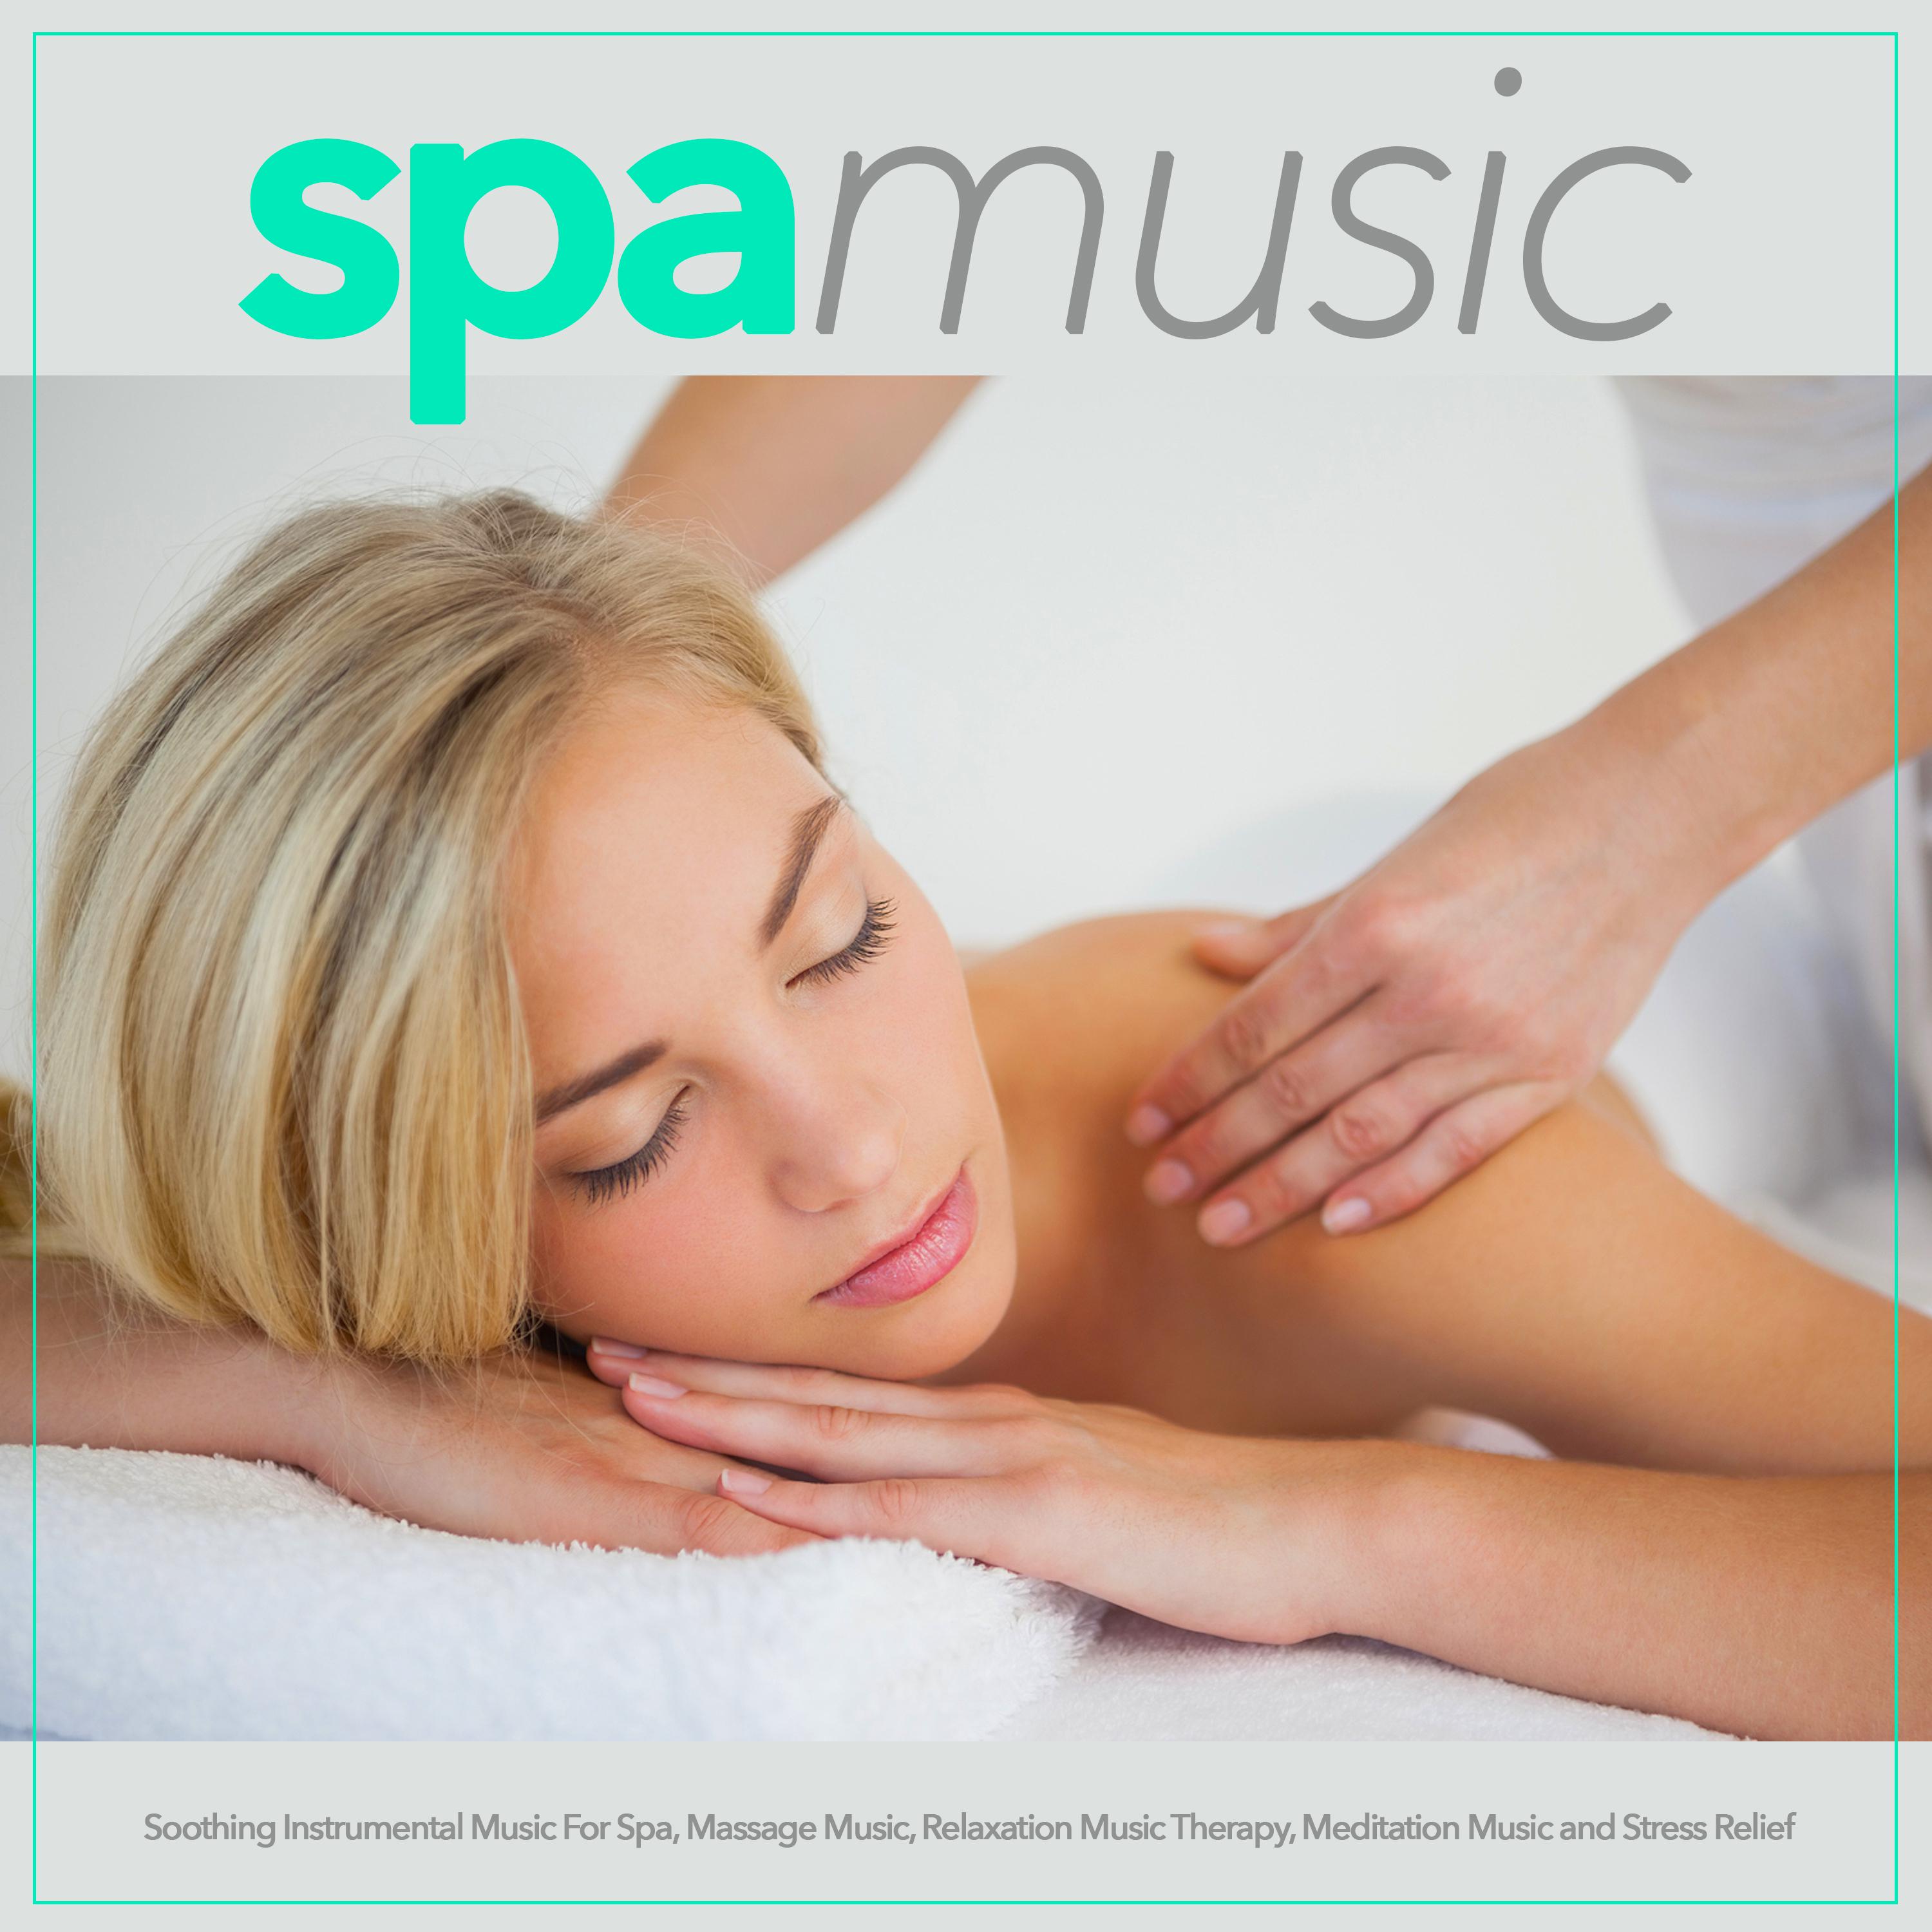 Background Spa Music